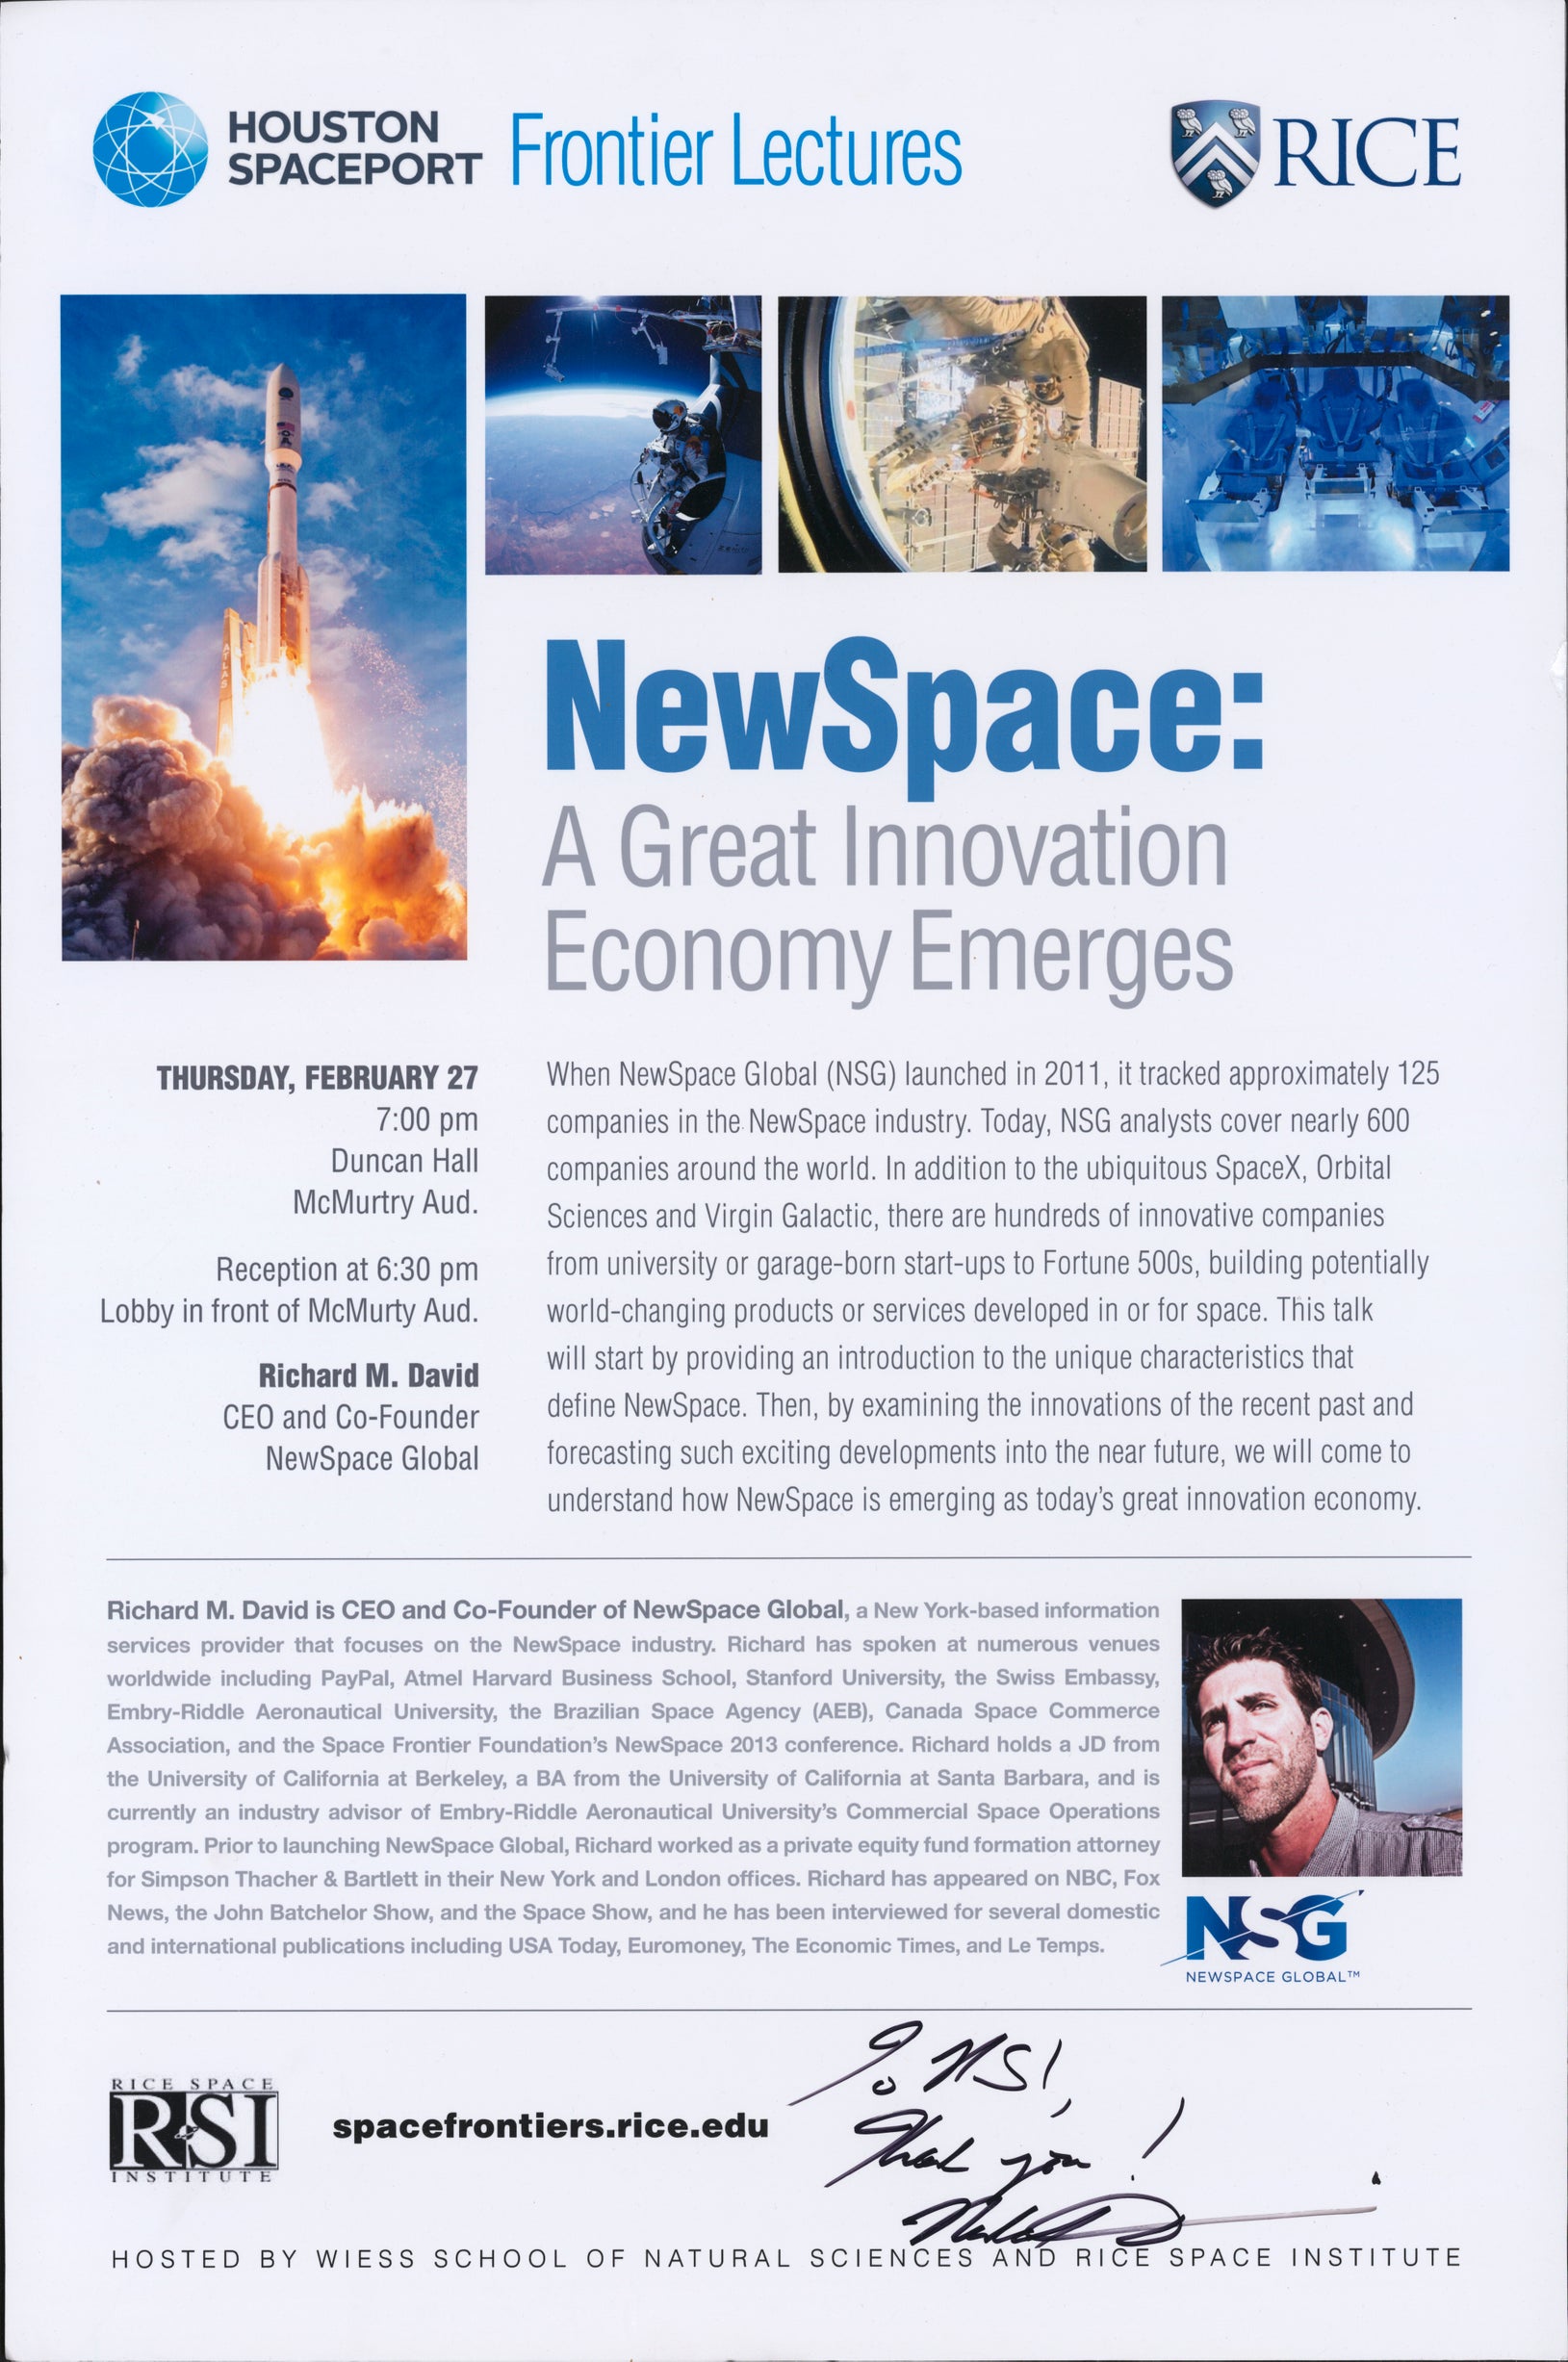 Poster of "NewSpace: A Great Innovation Economy Emerges" by Richard M. David